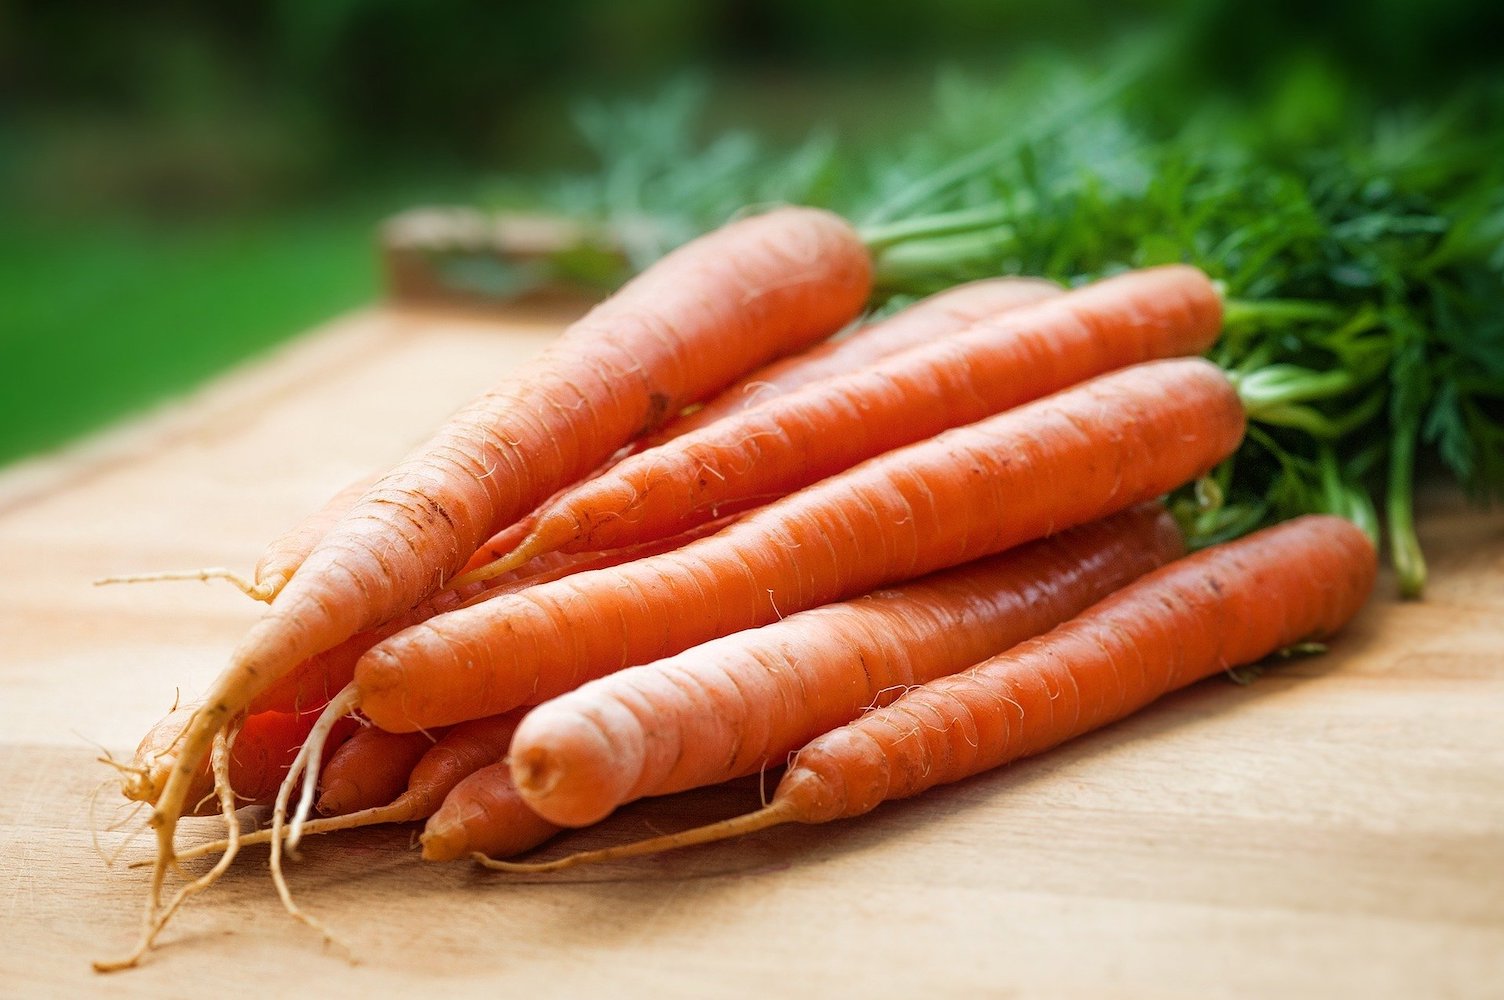 A bunch of raw, young carrots with tops